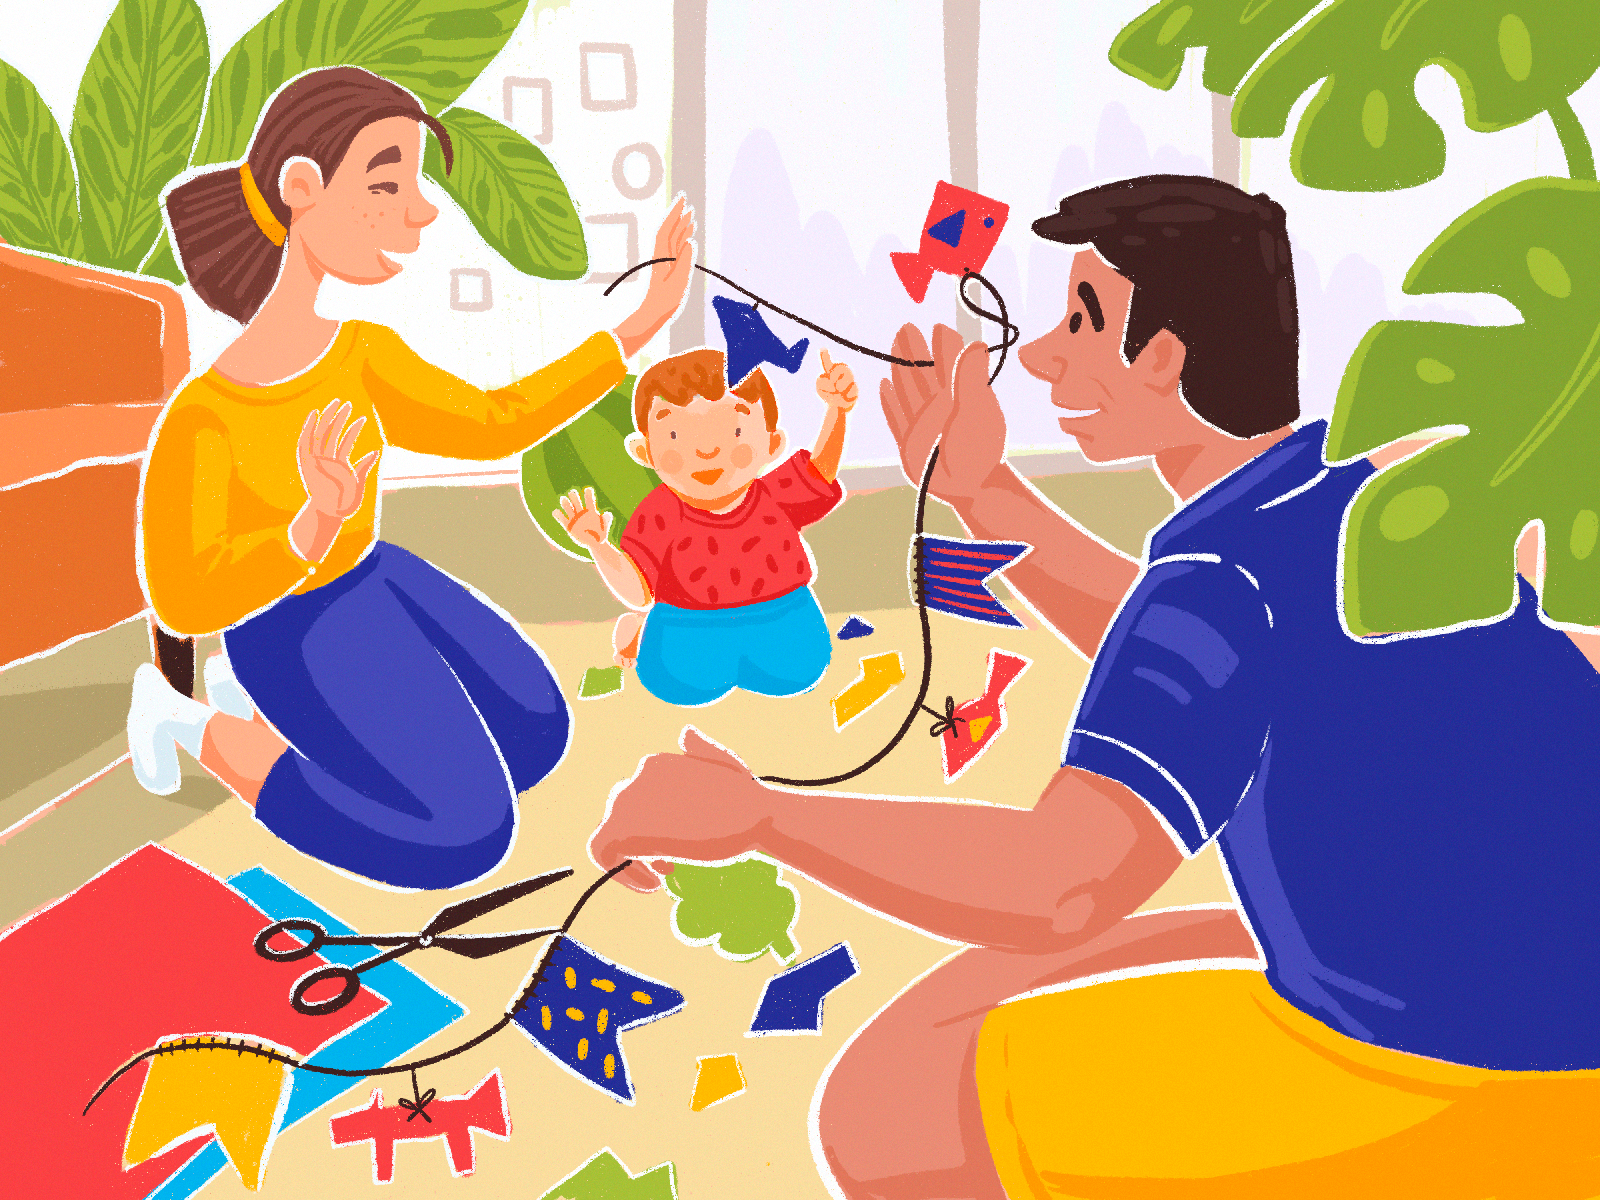 Family Time Illustration By Tubik Arts On Dribbble